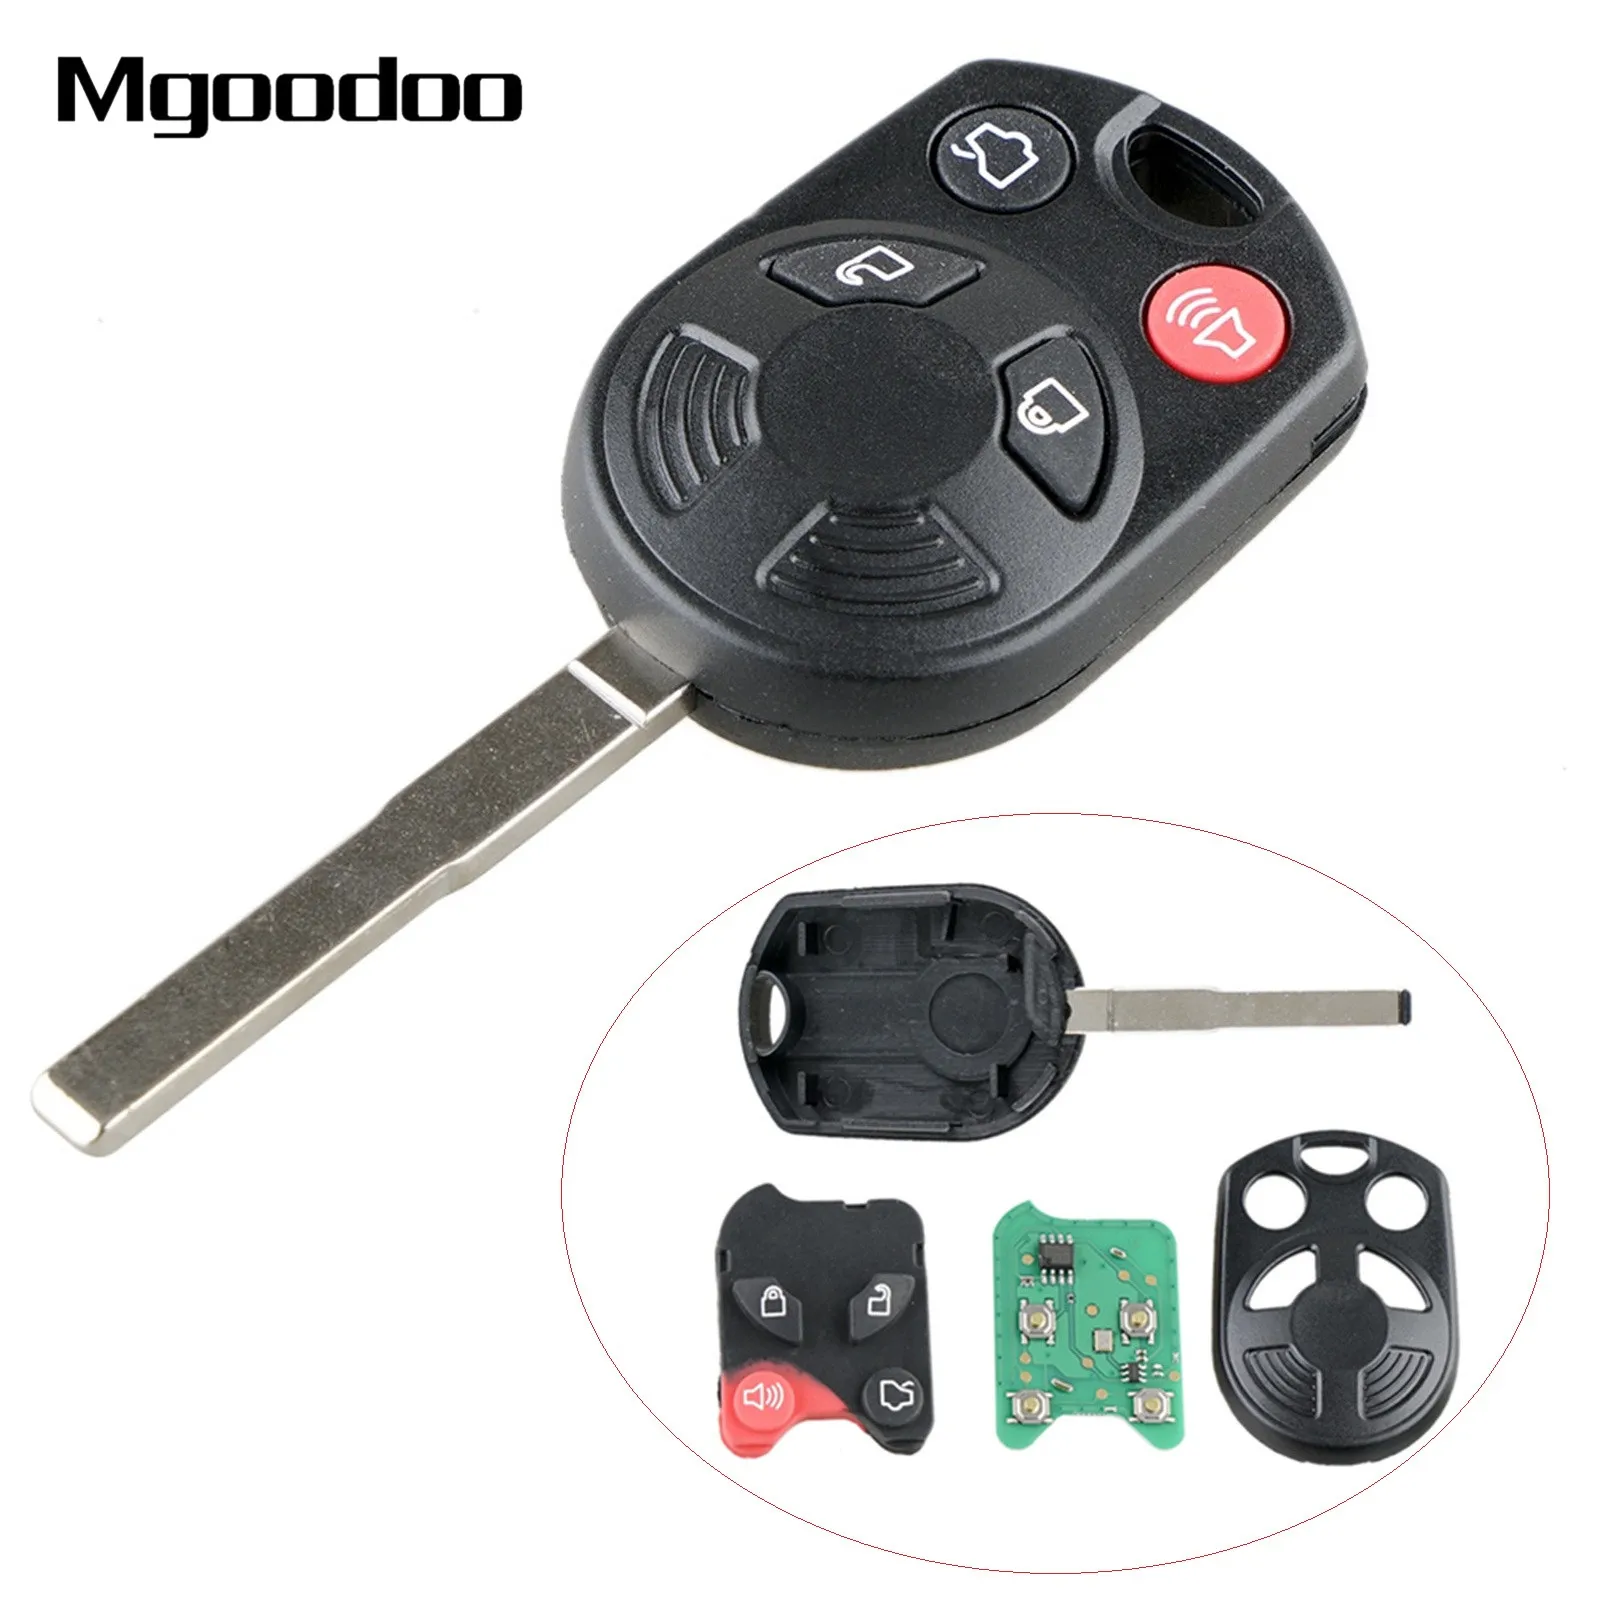 

Mgoodoo 4Button 80bit 315MHz Remote Car Key Fob For Ford Escape Focus Fiesta C-Max Transit Keyless Entry Combo FCCID OUCD6000022